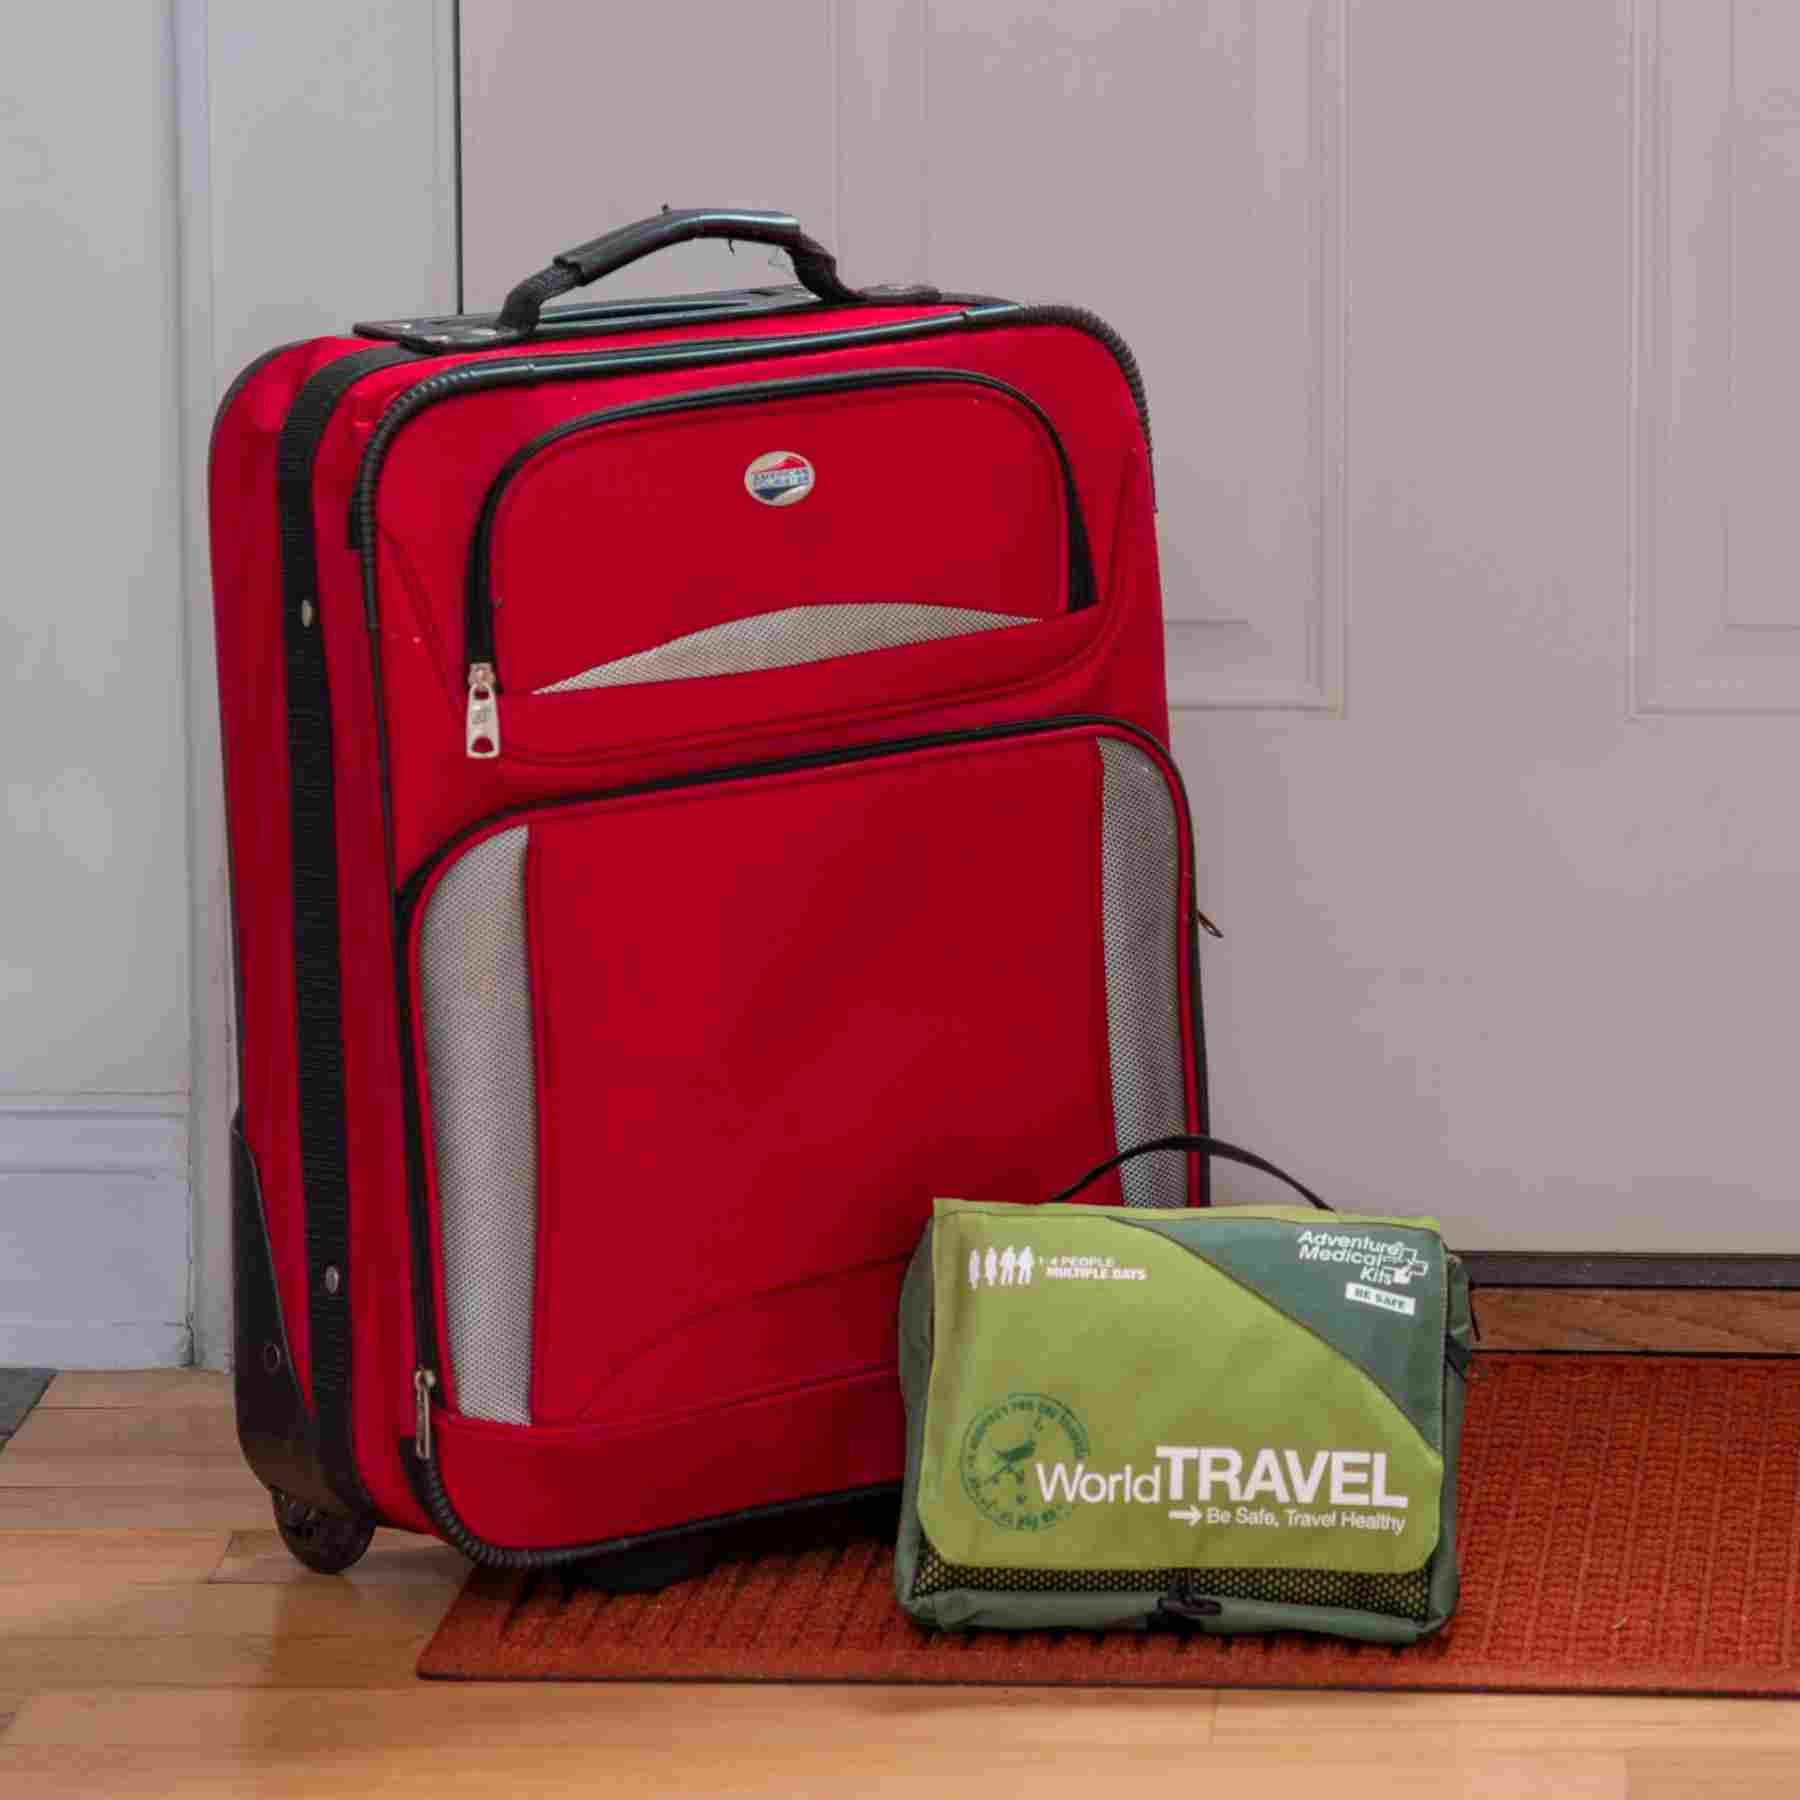 Travel Series Medical Kit - World Travel in front of luggage and door